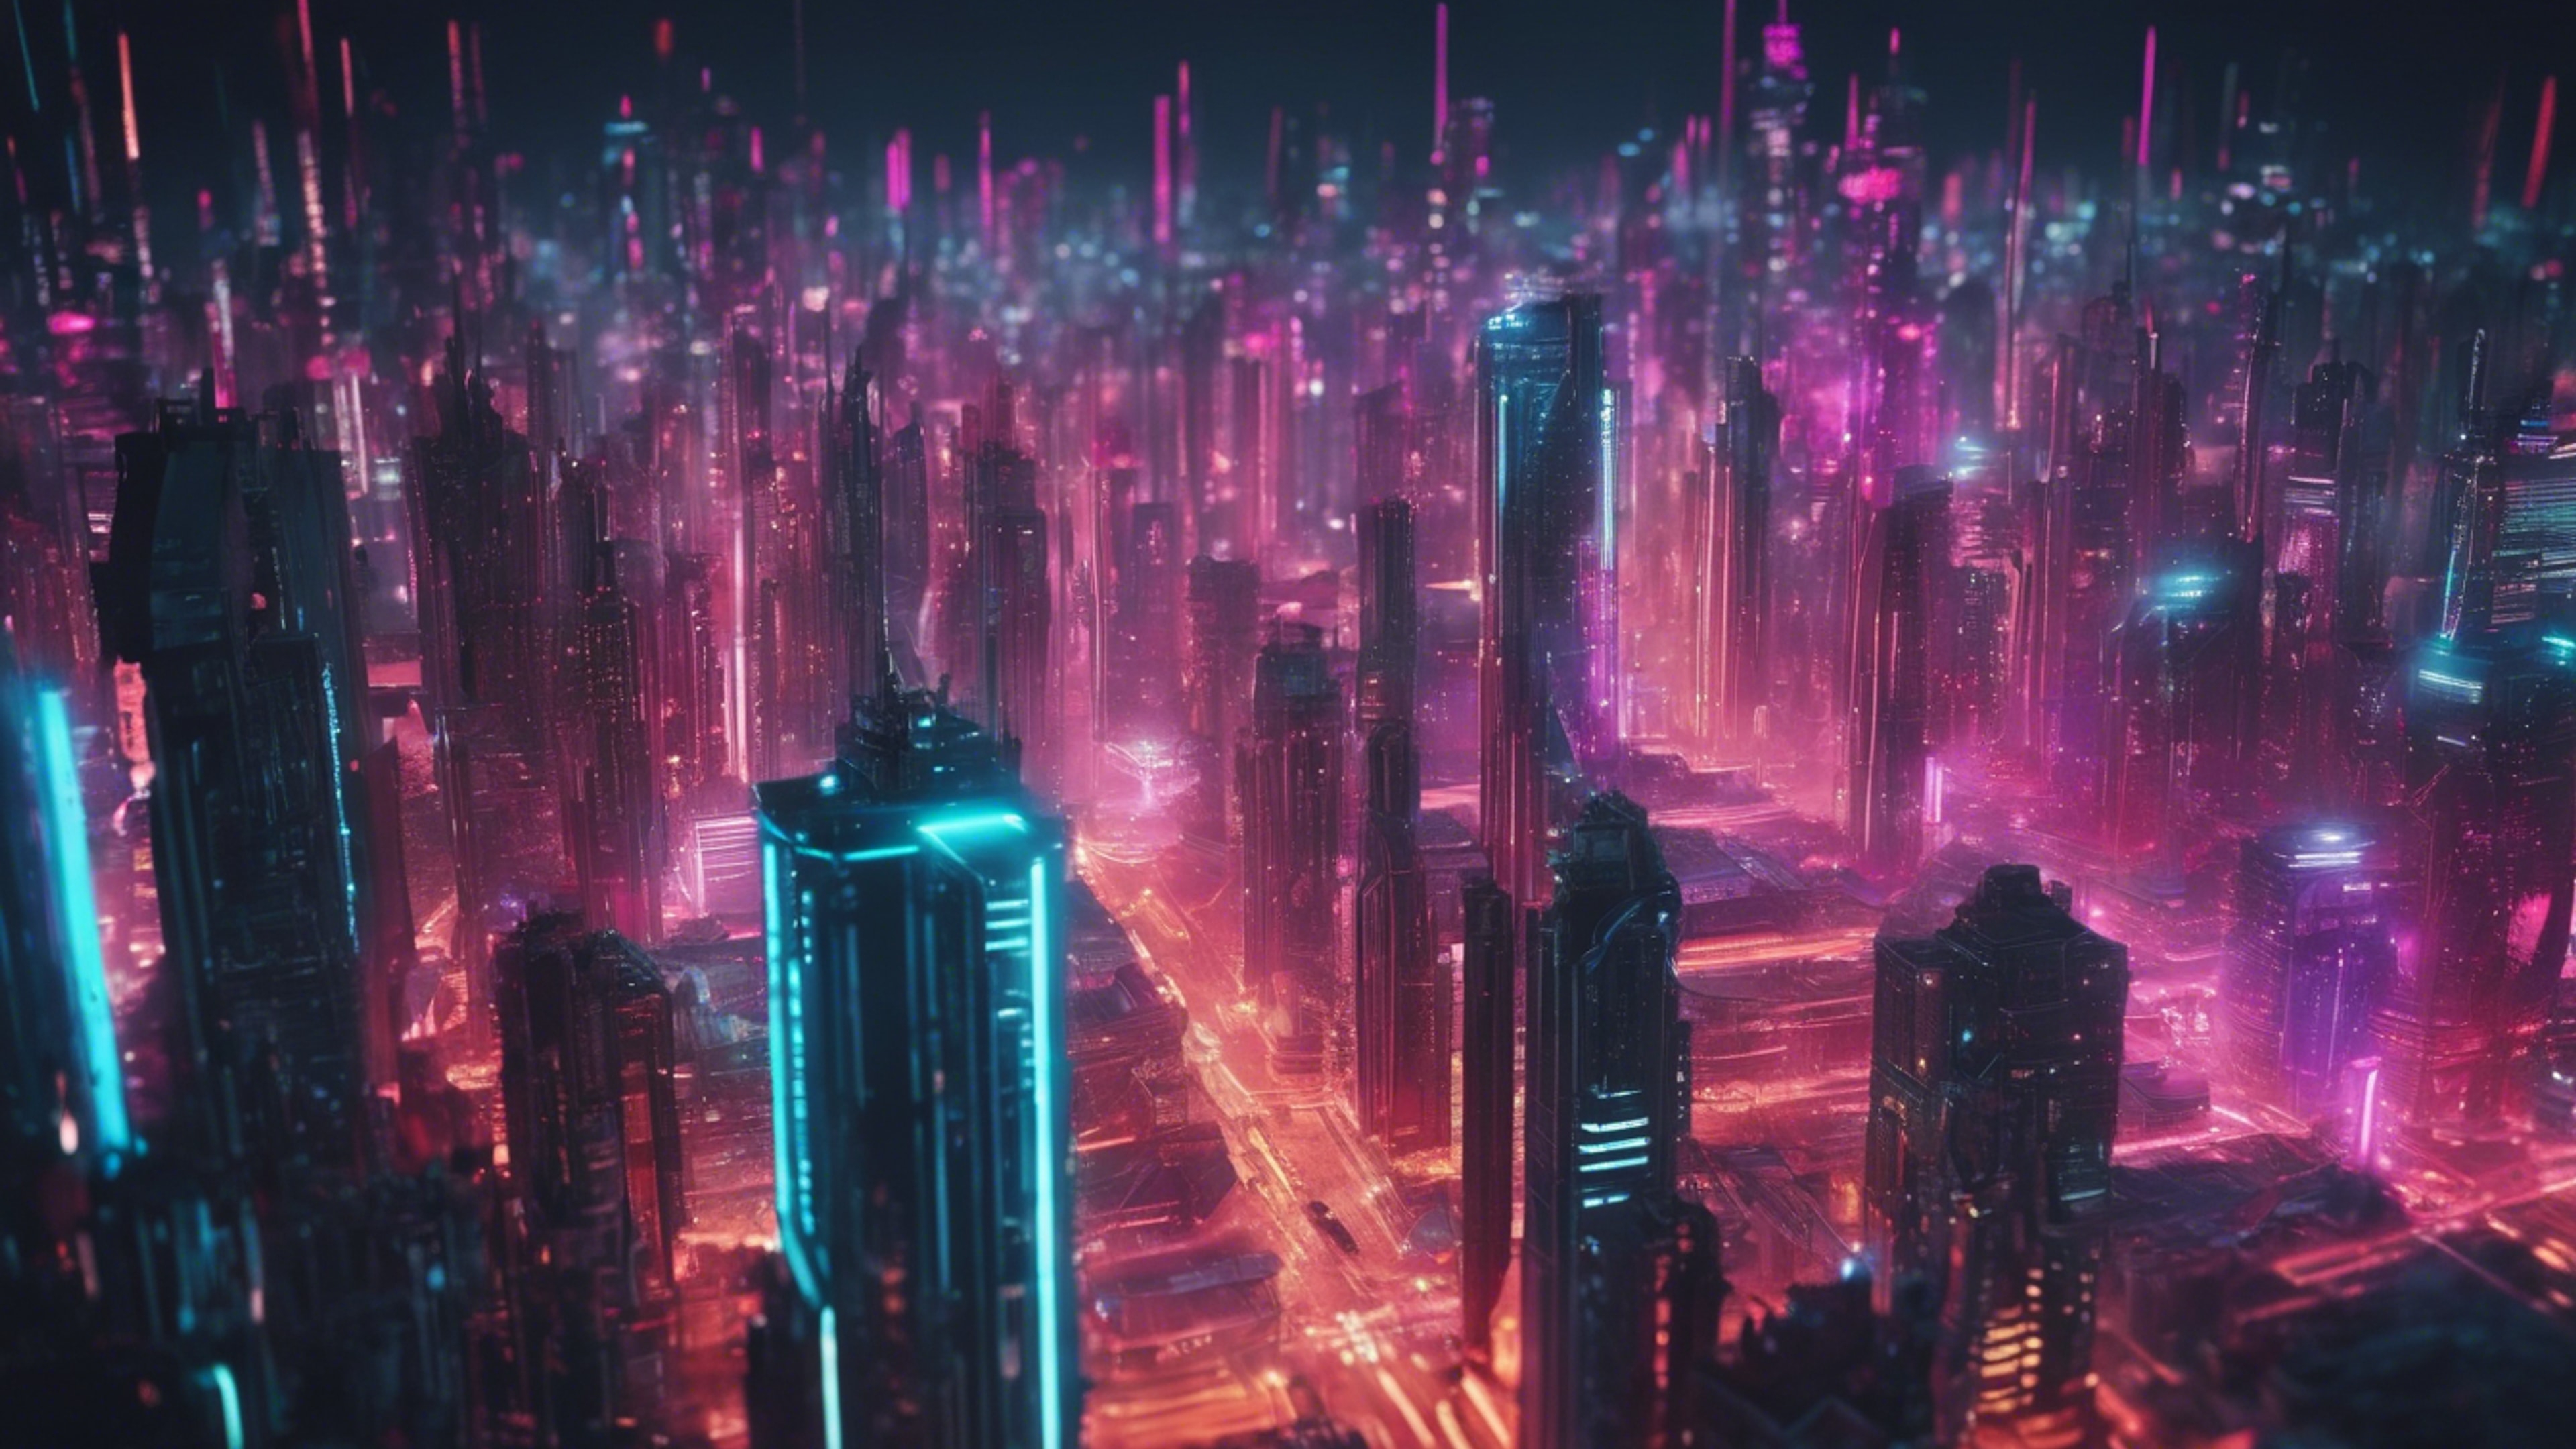 An abstract rendition of a cyberpunk city skyline lit up with neon lights. Papel de parede[be51173c54ff4f4dbec8]